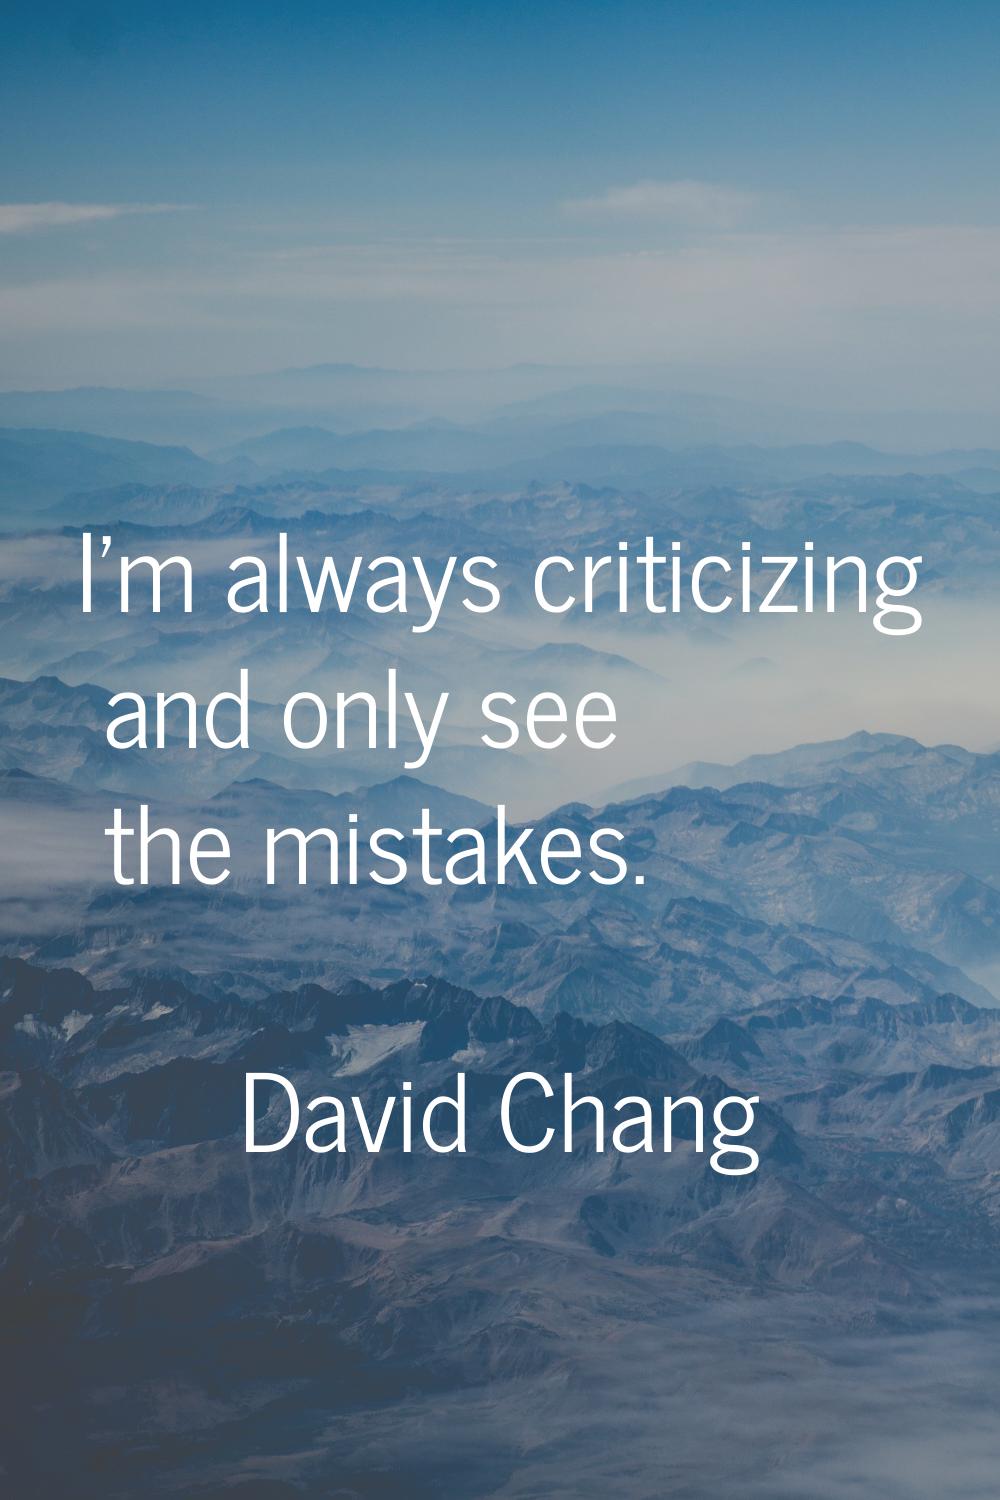 I'm always criticizing and only see the mistakes.